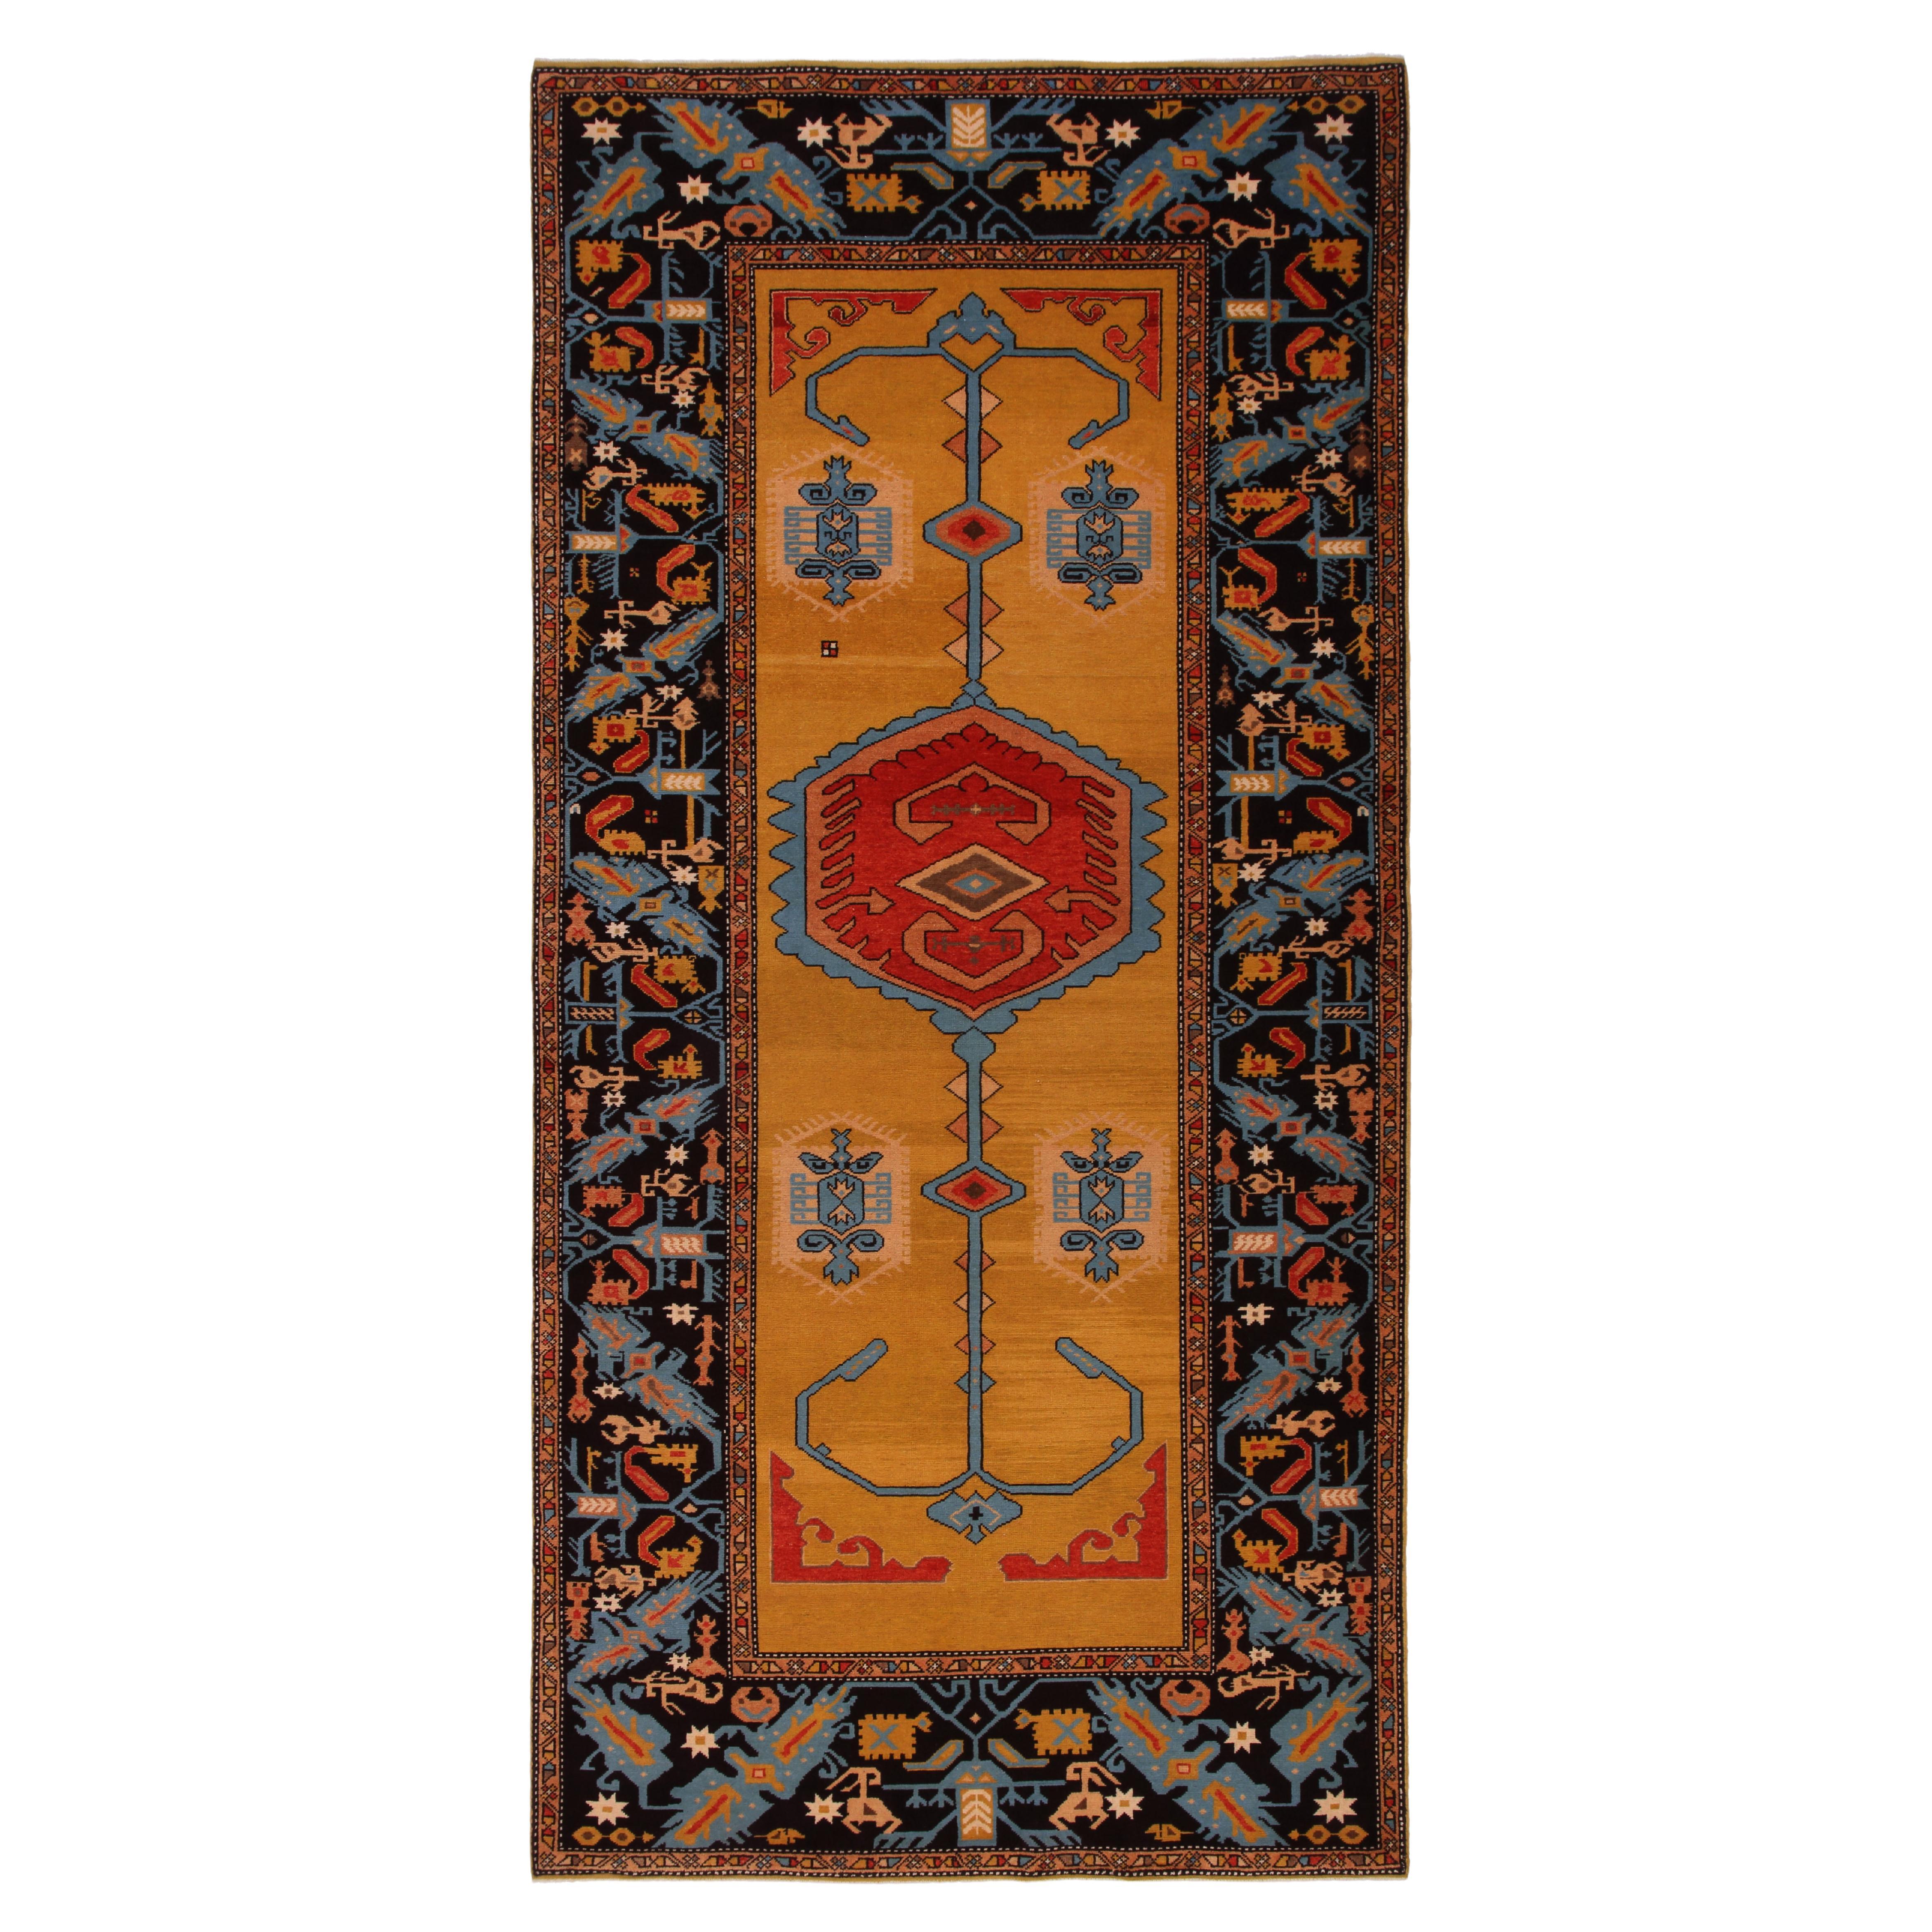 Ararat Rugs the Sailer Anchor Carpet 17th Century Anatolian Revival Natural Dyed For Sale